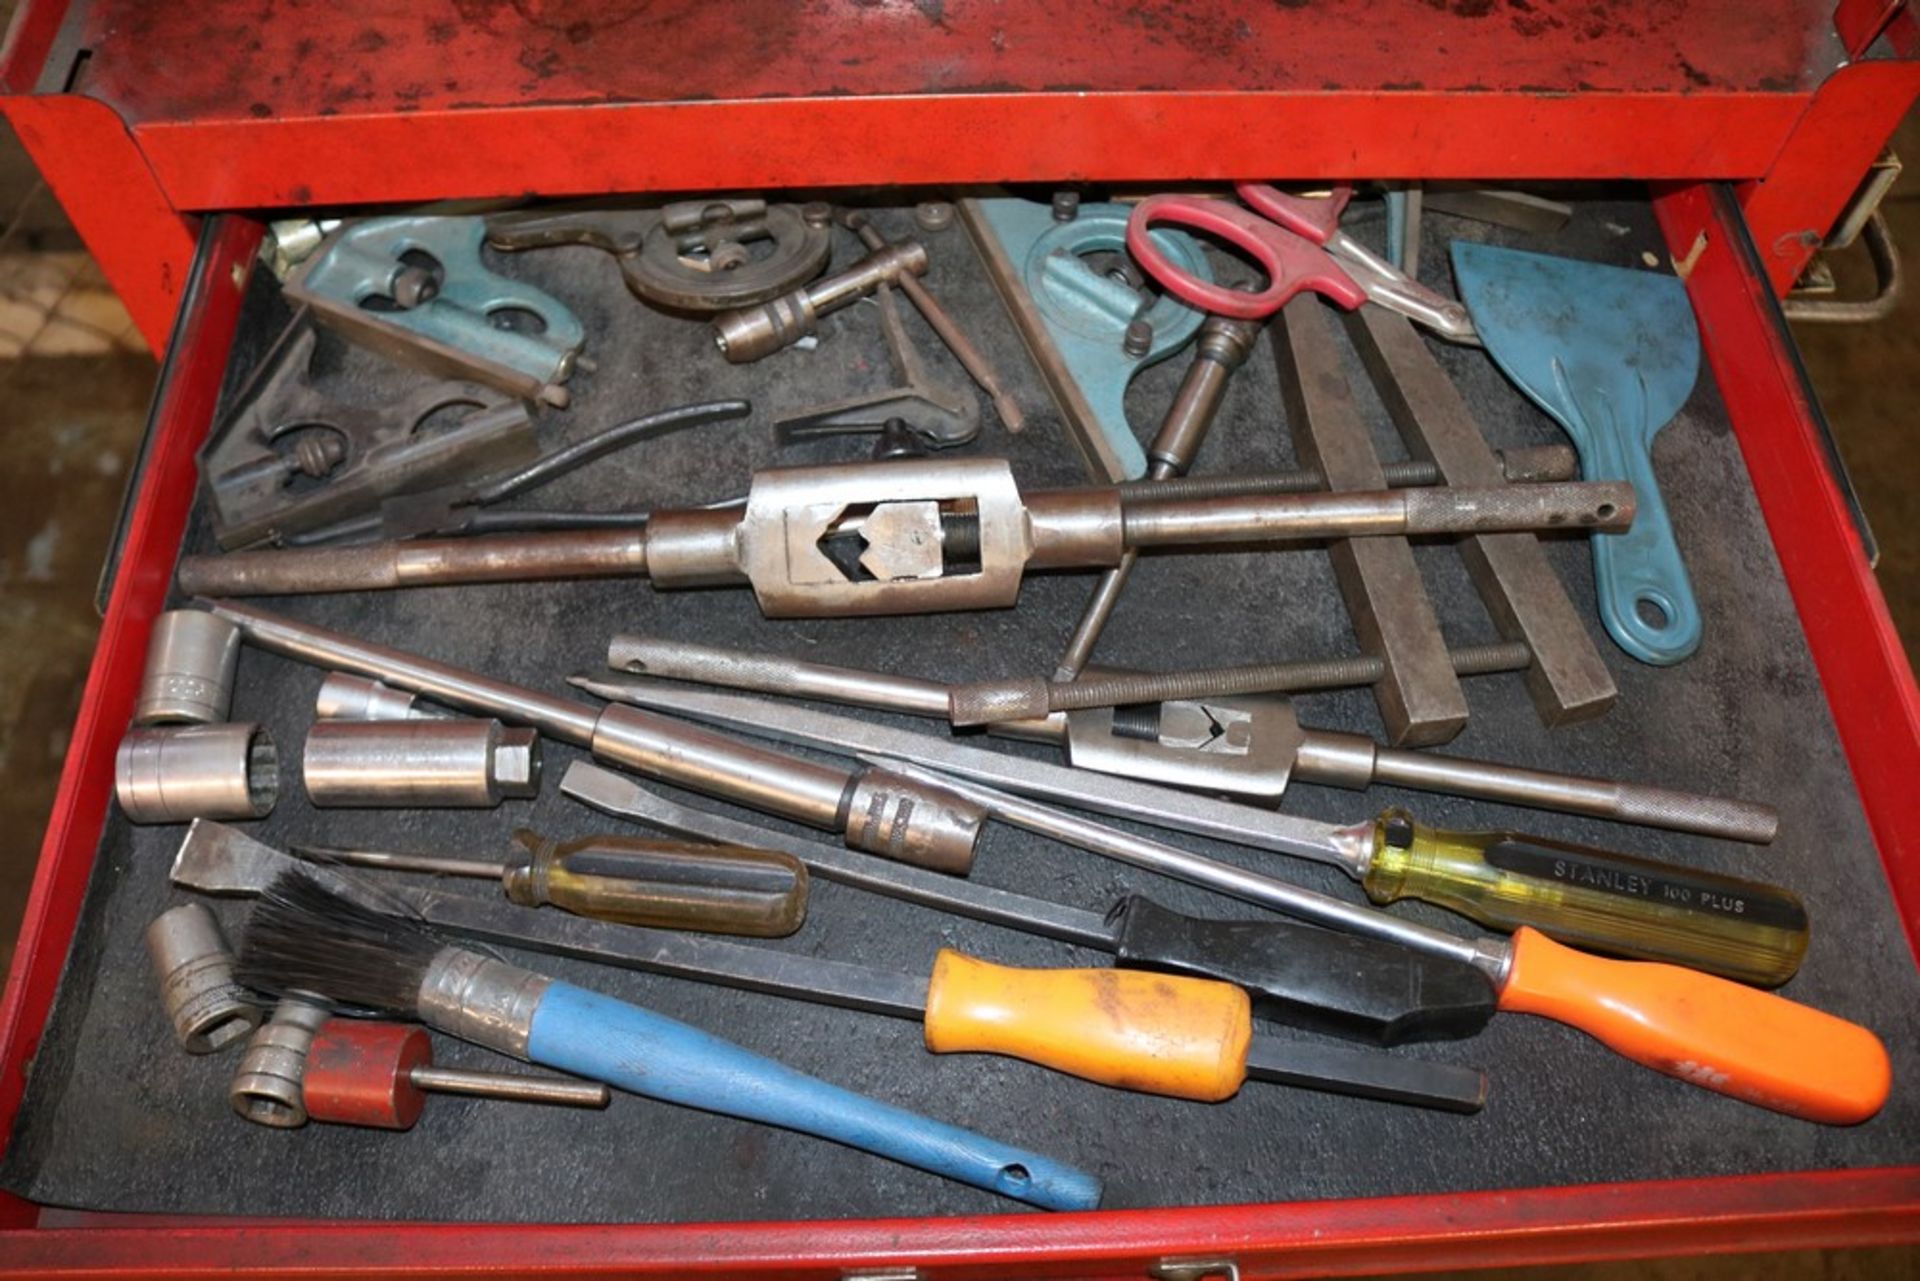 Stackon Rolling Tool Box with Contents "Pnuematic Tools, Tooling, Handtools and Others" - Image 6 of 8